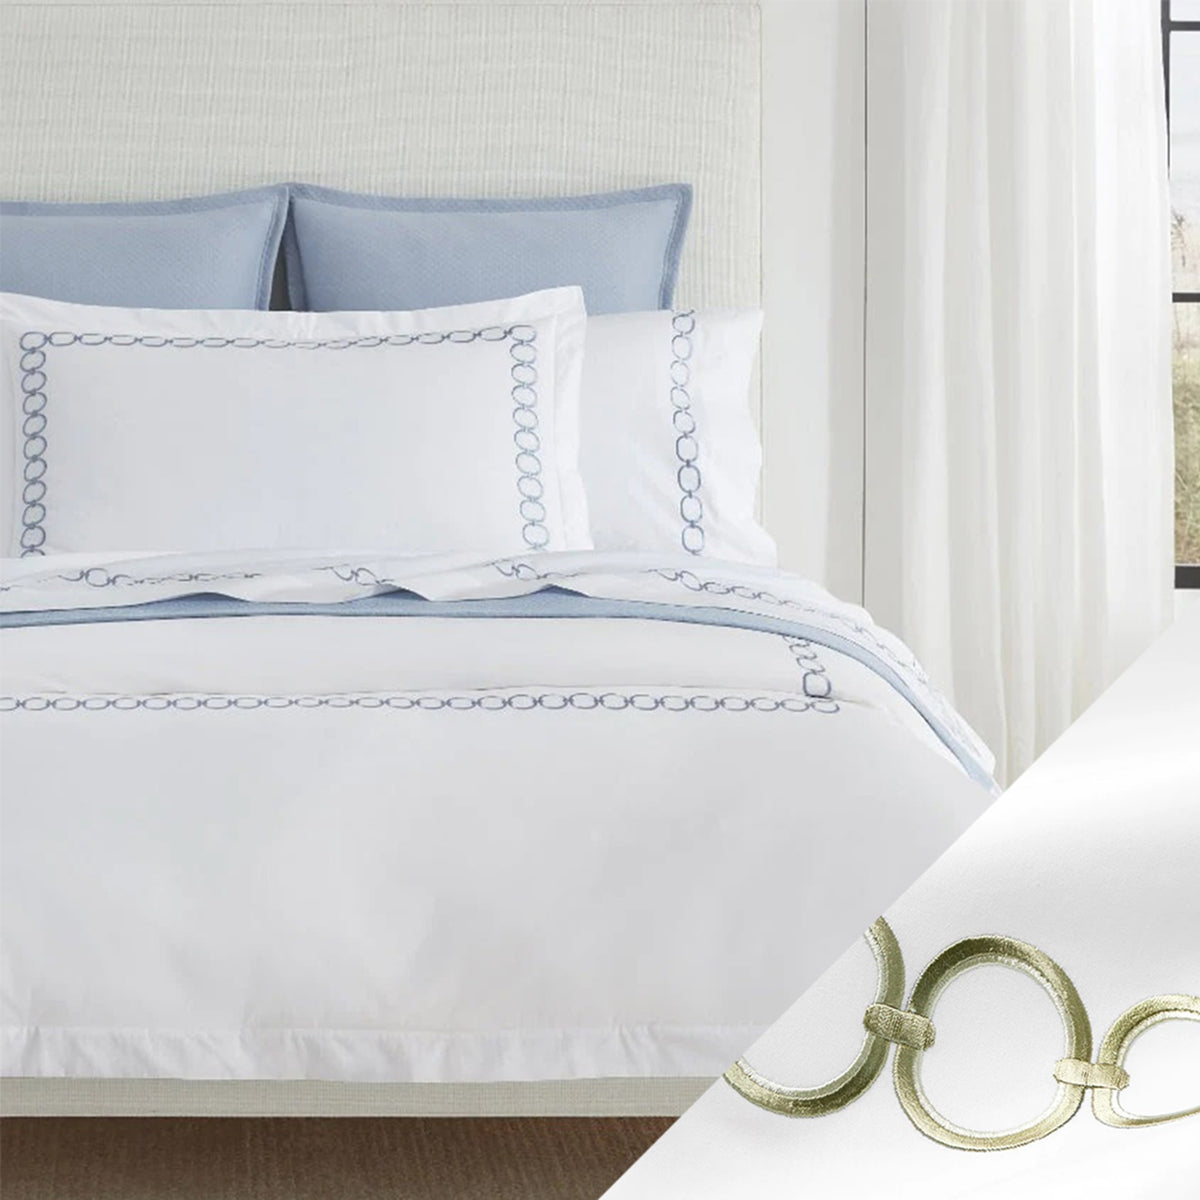 Bed Dressed in Sferra Catena Bedding with Swatch in White/Willow Color